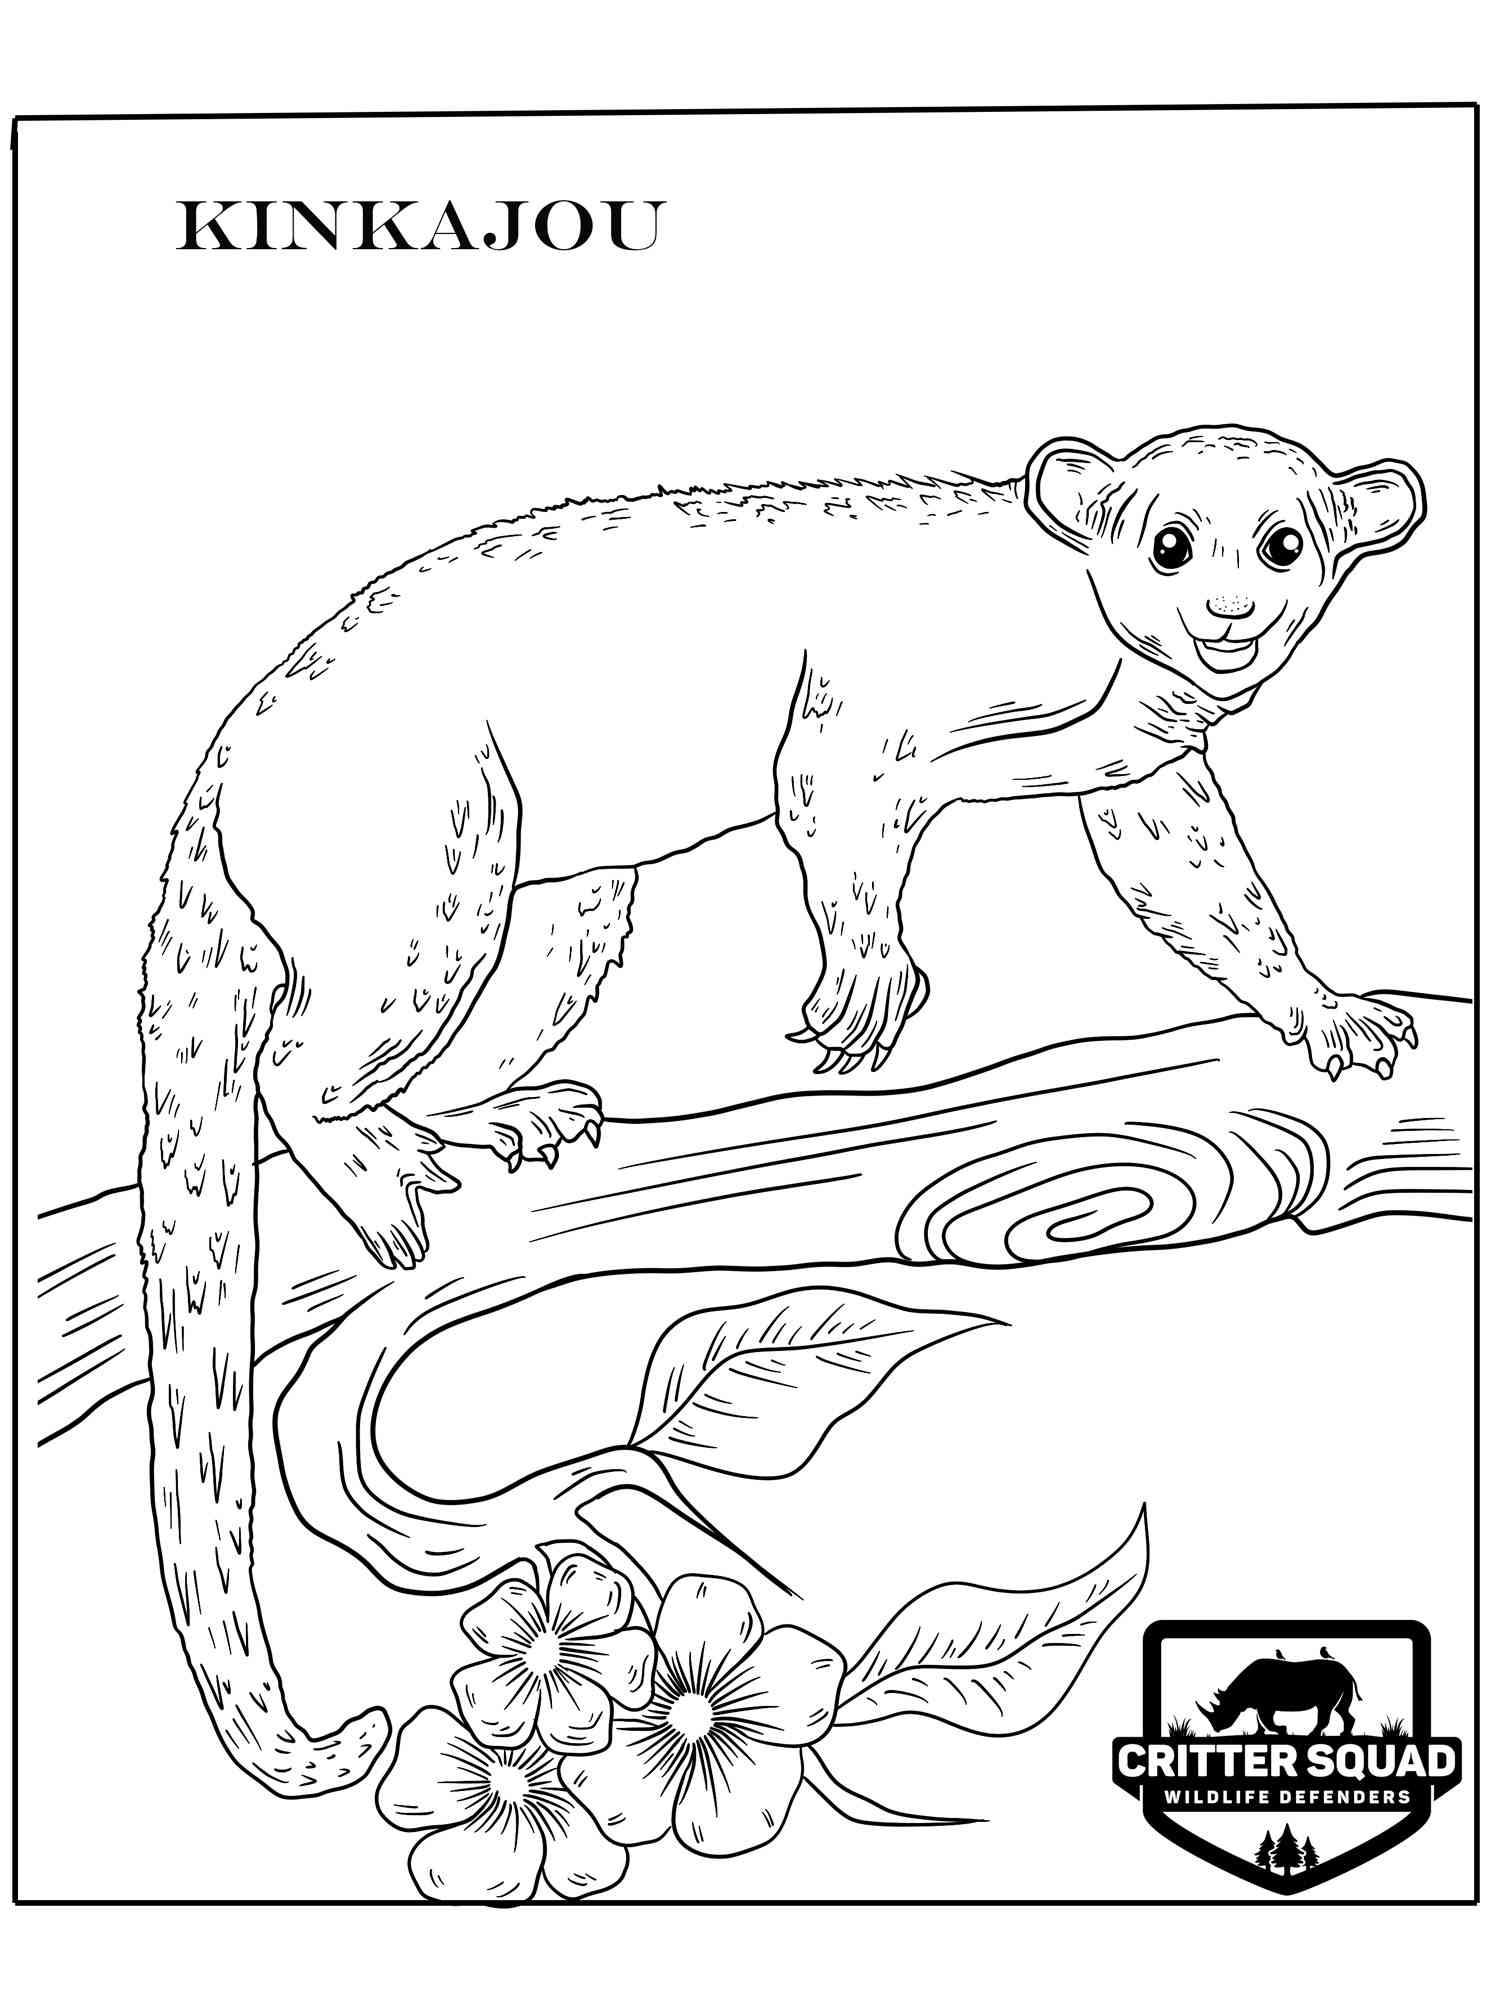 Kinkajou on the branch coloring page